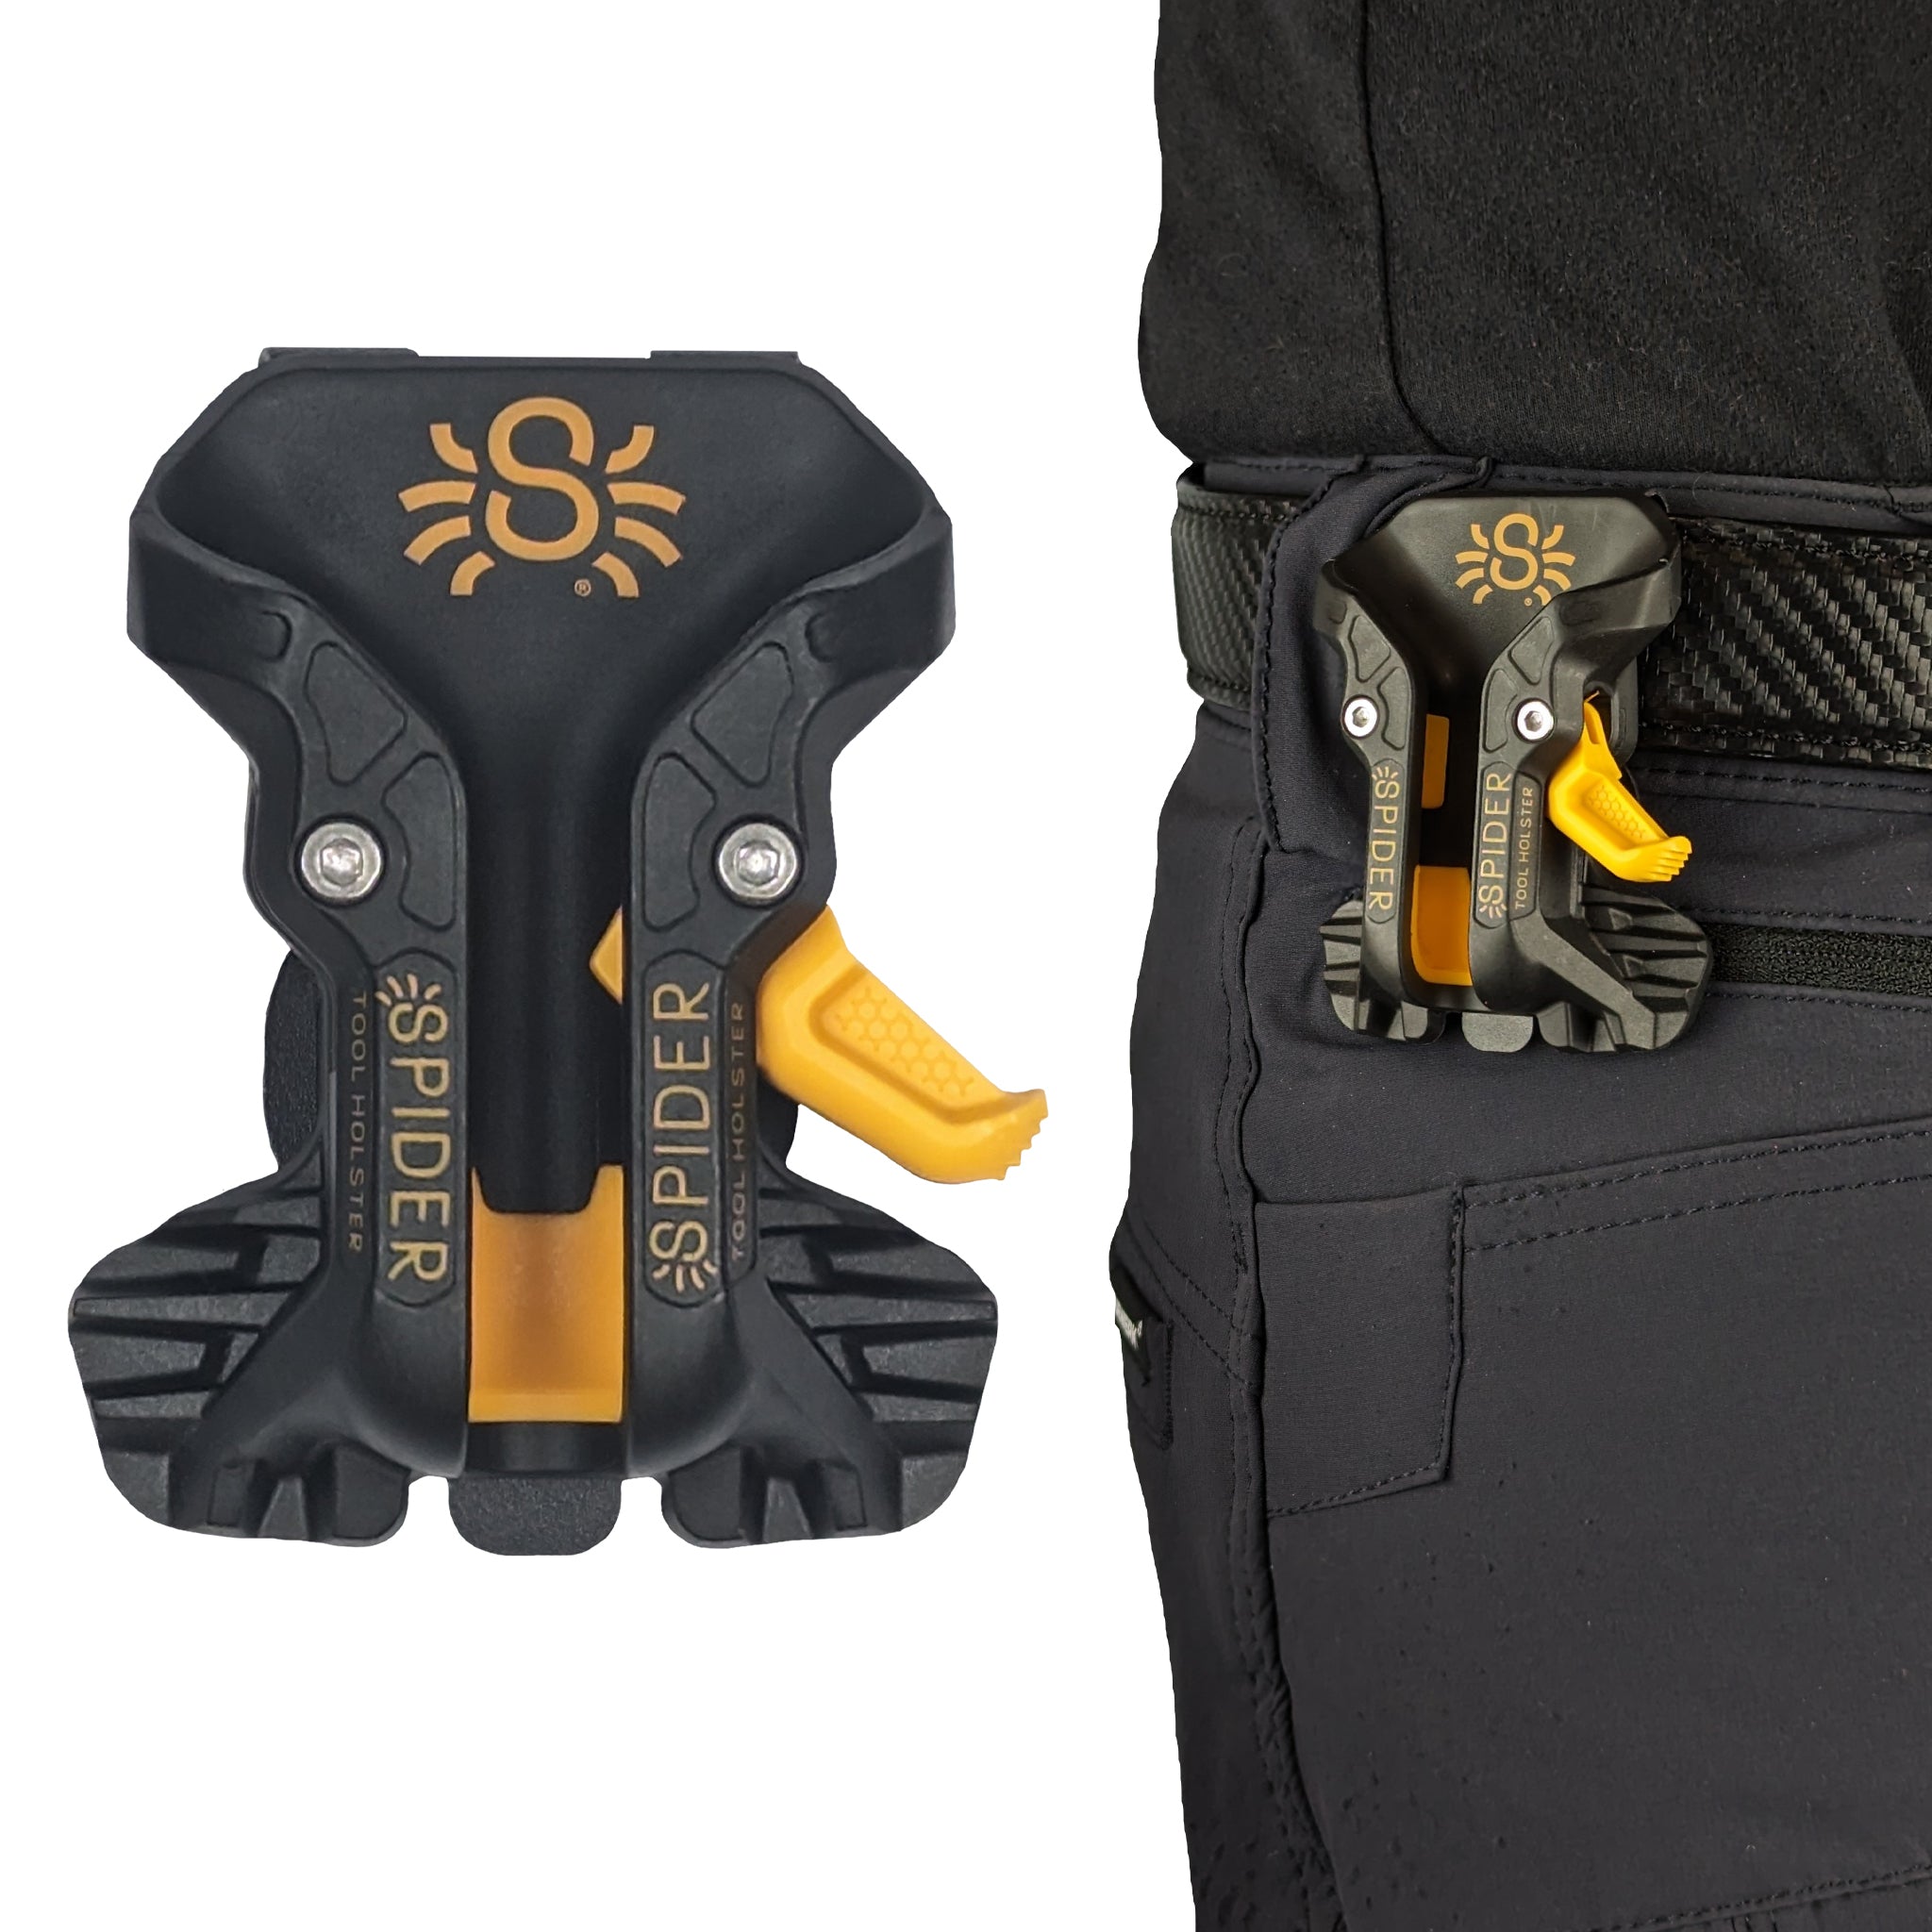 5600TH: Pro Tool Holster